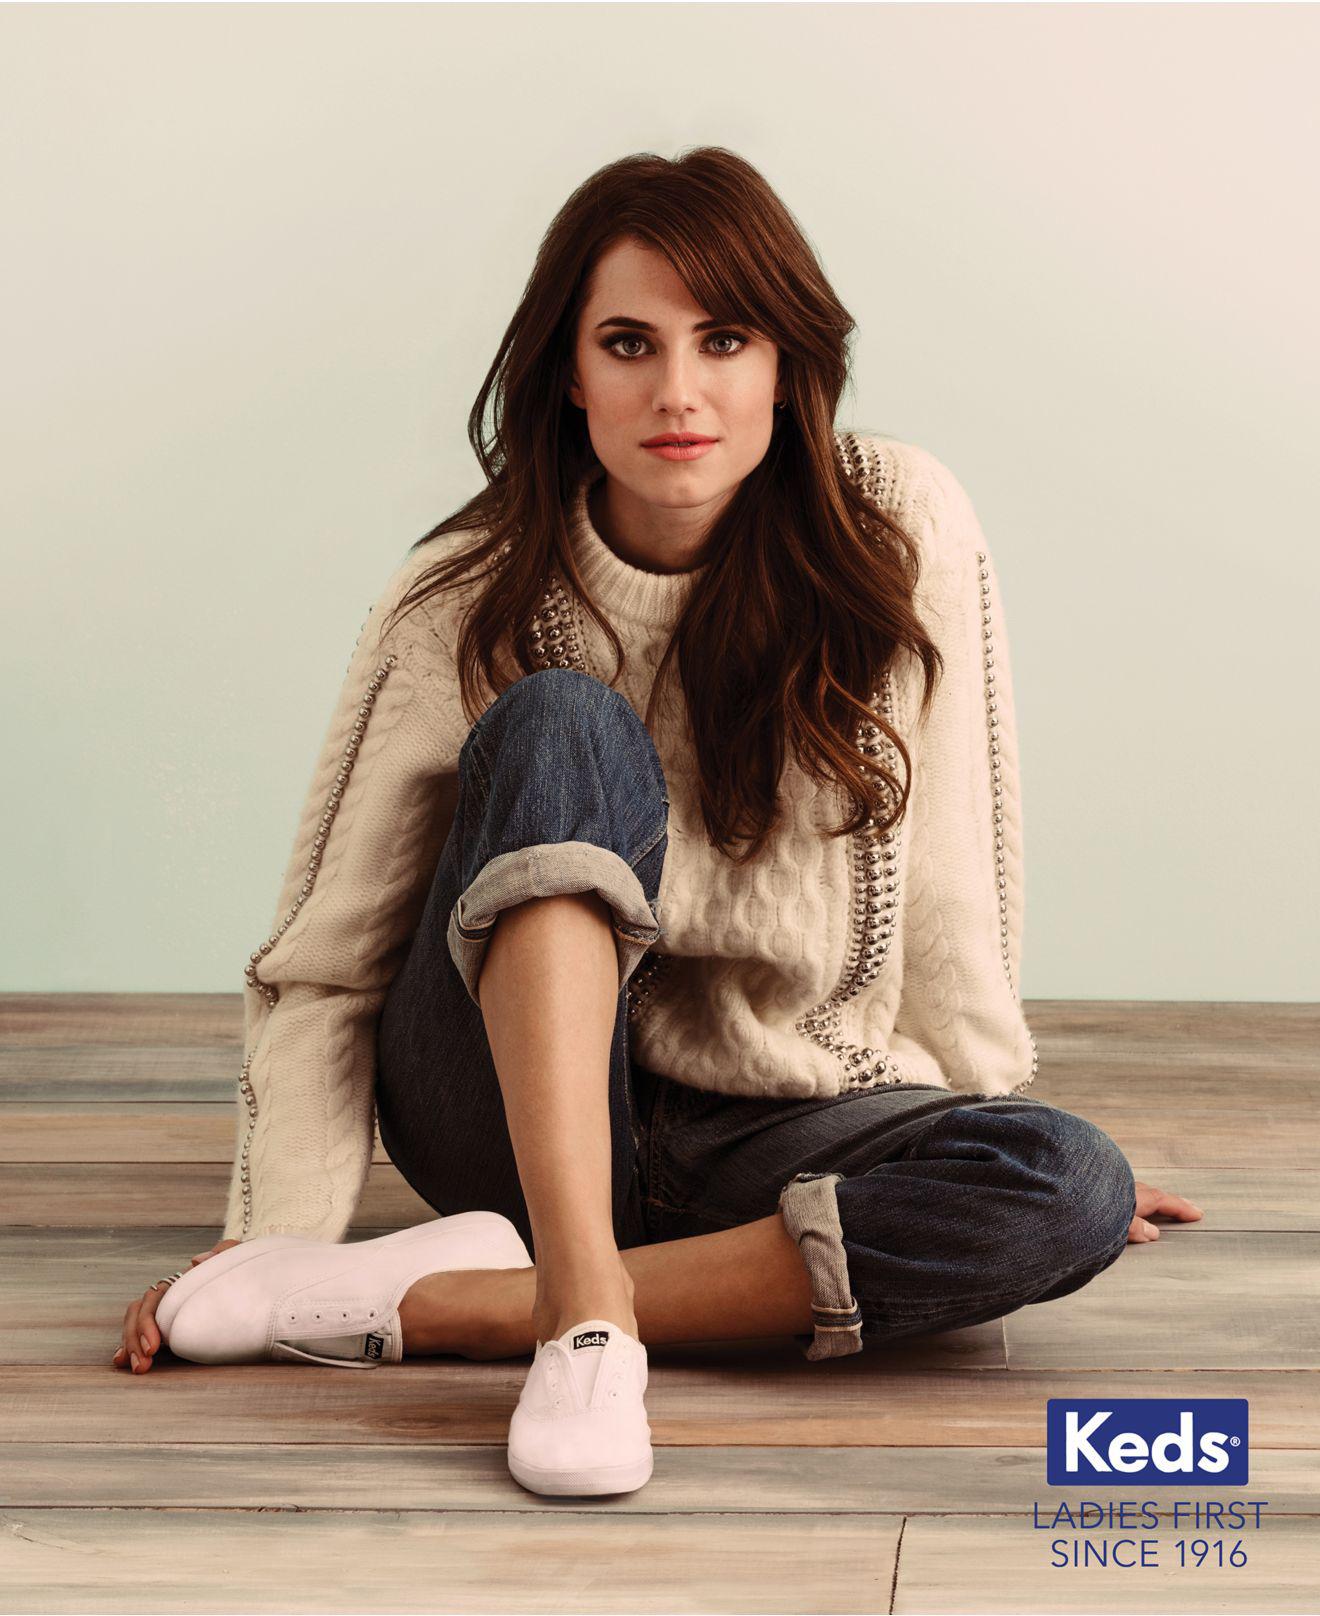 Keds Chillax Slip-on Laceless Sneakers 